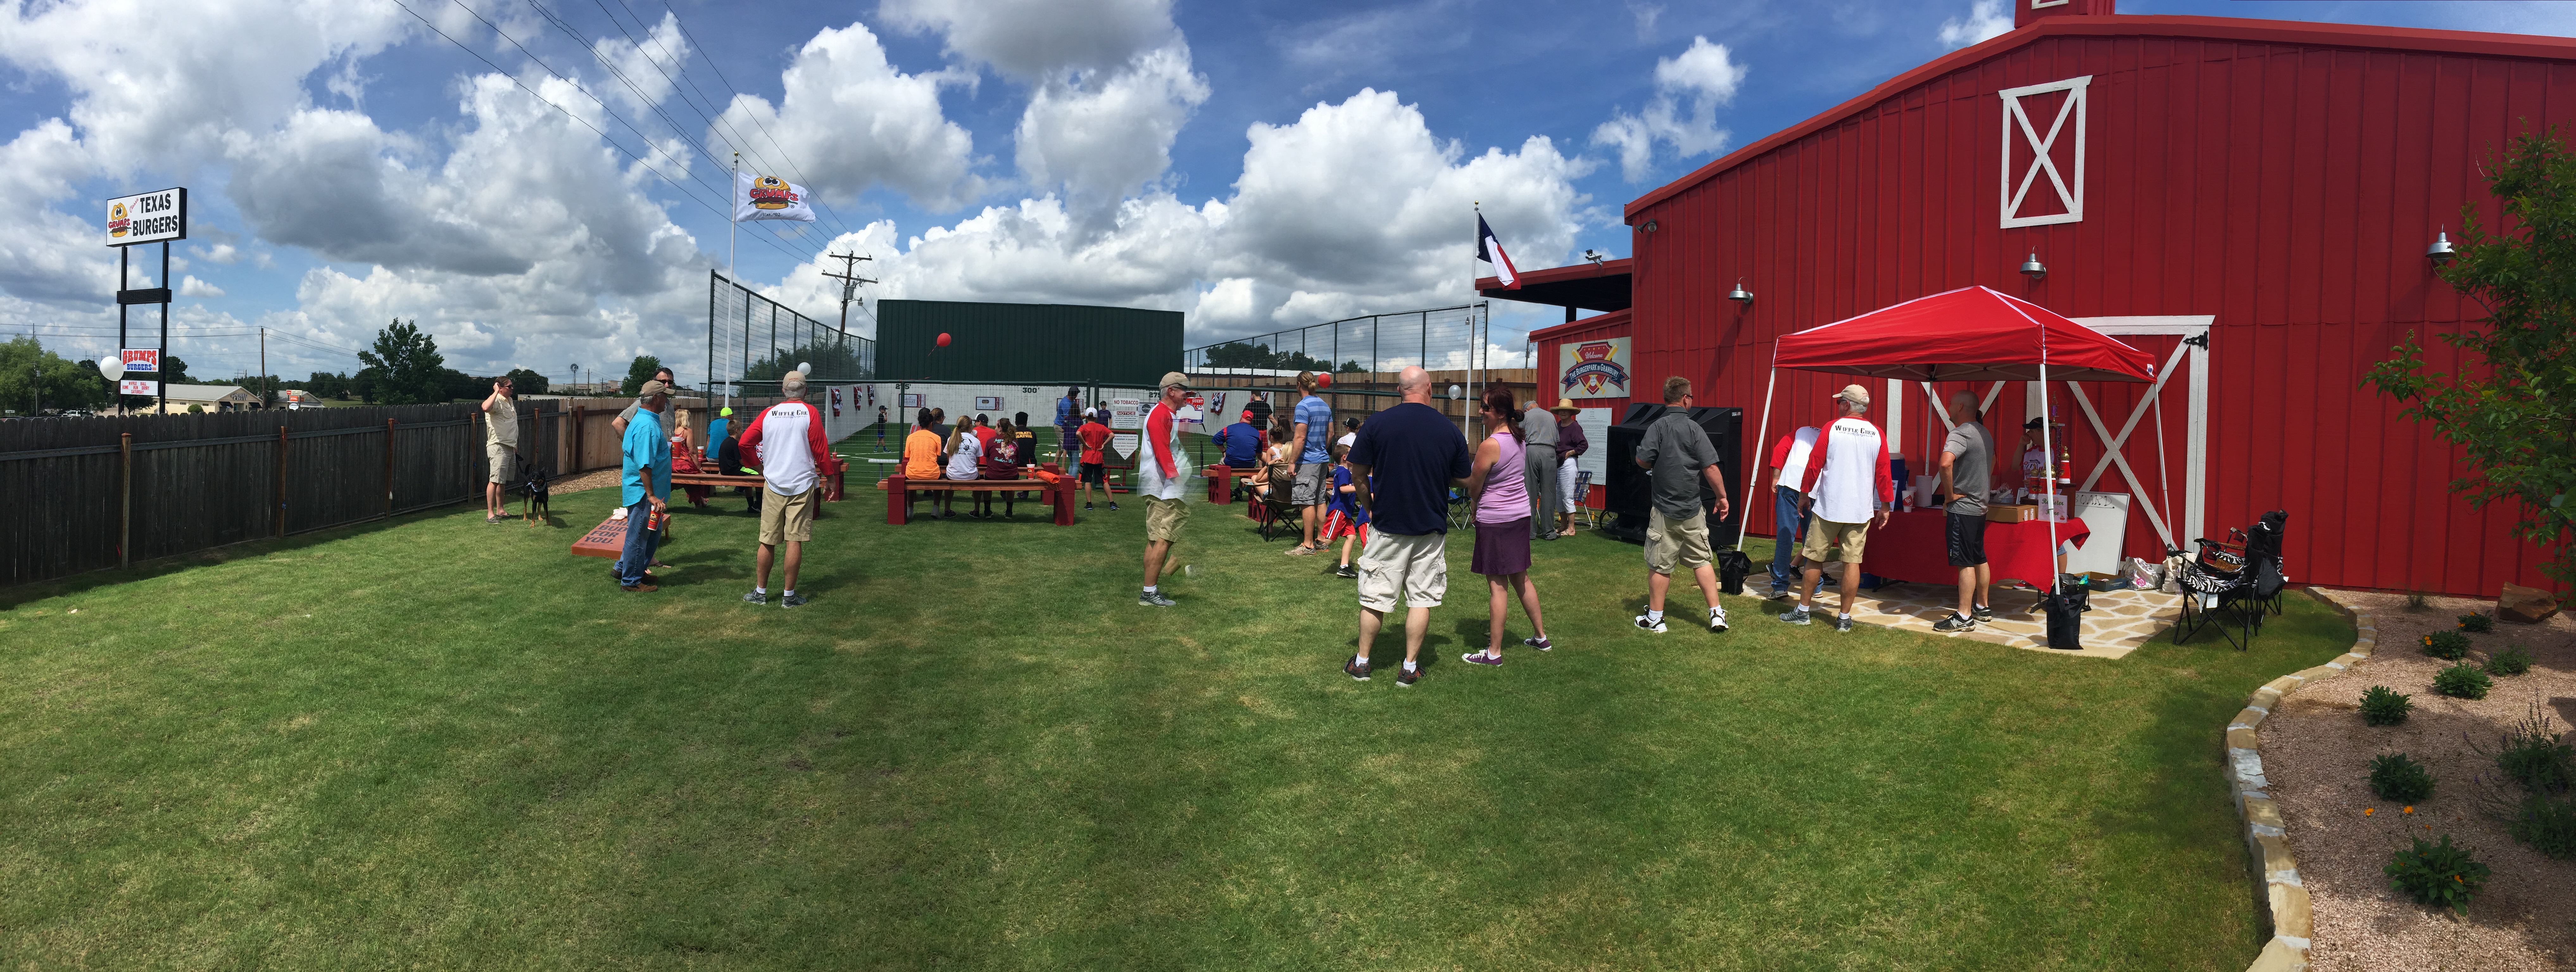 Opening Day of The BurgerPark in Granbury